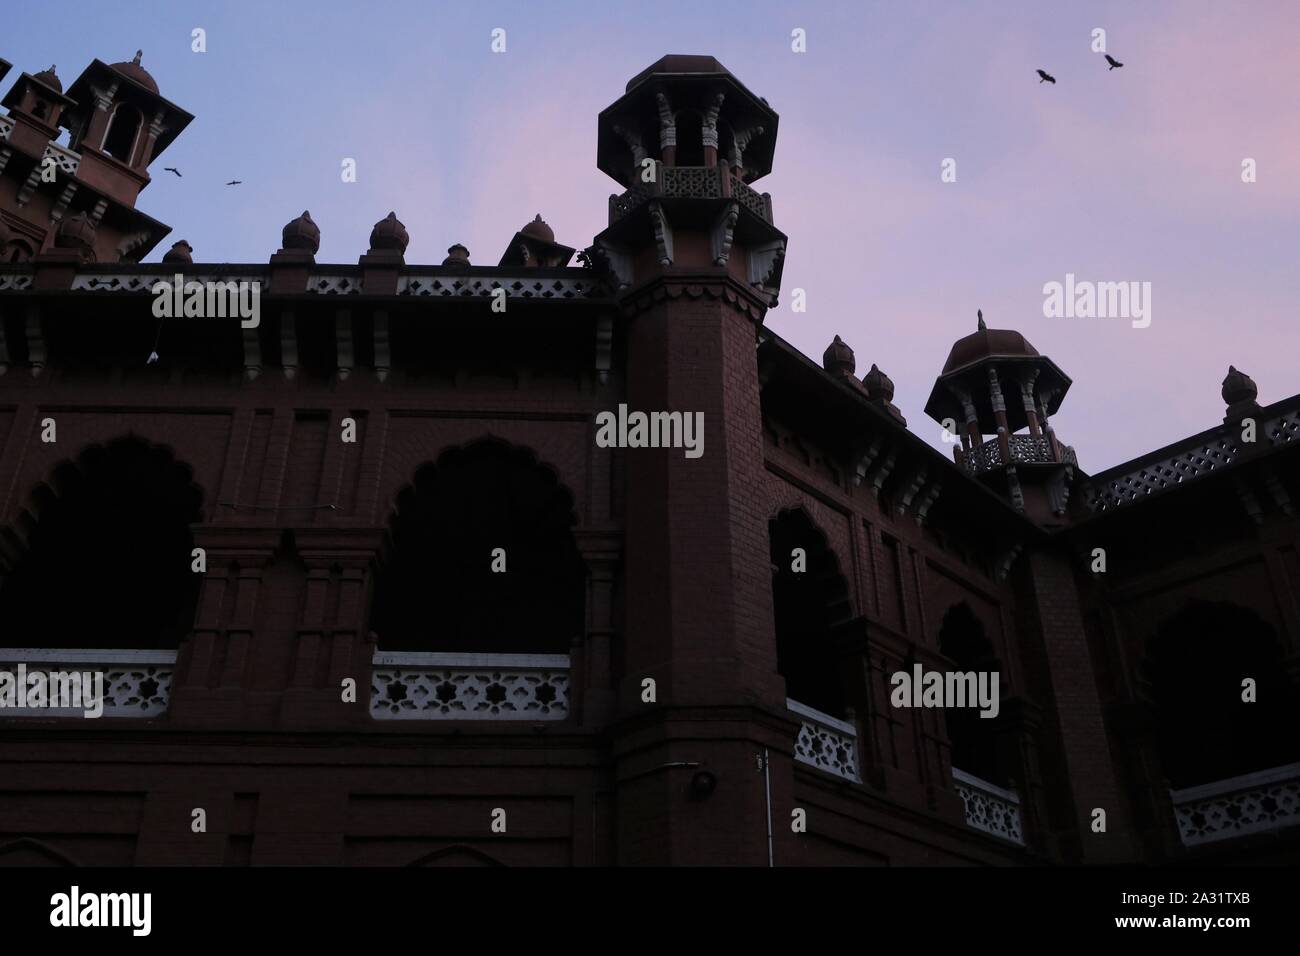 Dhaka, Bangladesh. 5th Oct, 2019. A front view of Curzon hall during the sunset, a British Raj-era building and now home of the Faculty of Science of Dhaka University. Credit: MD Mehedi Hasan/ZUMA Wire/Alamy Live News Stock Photo